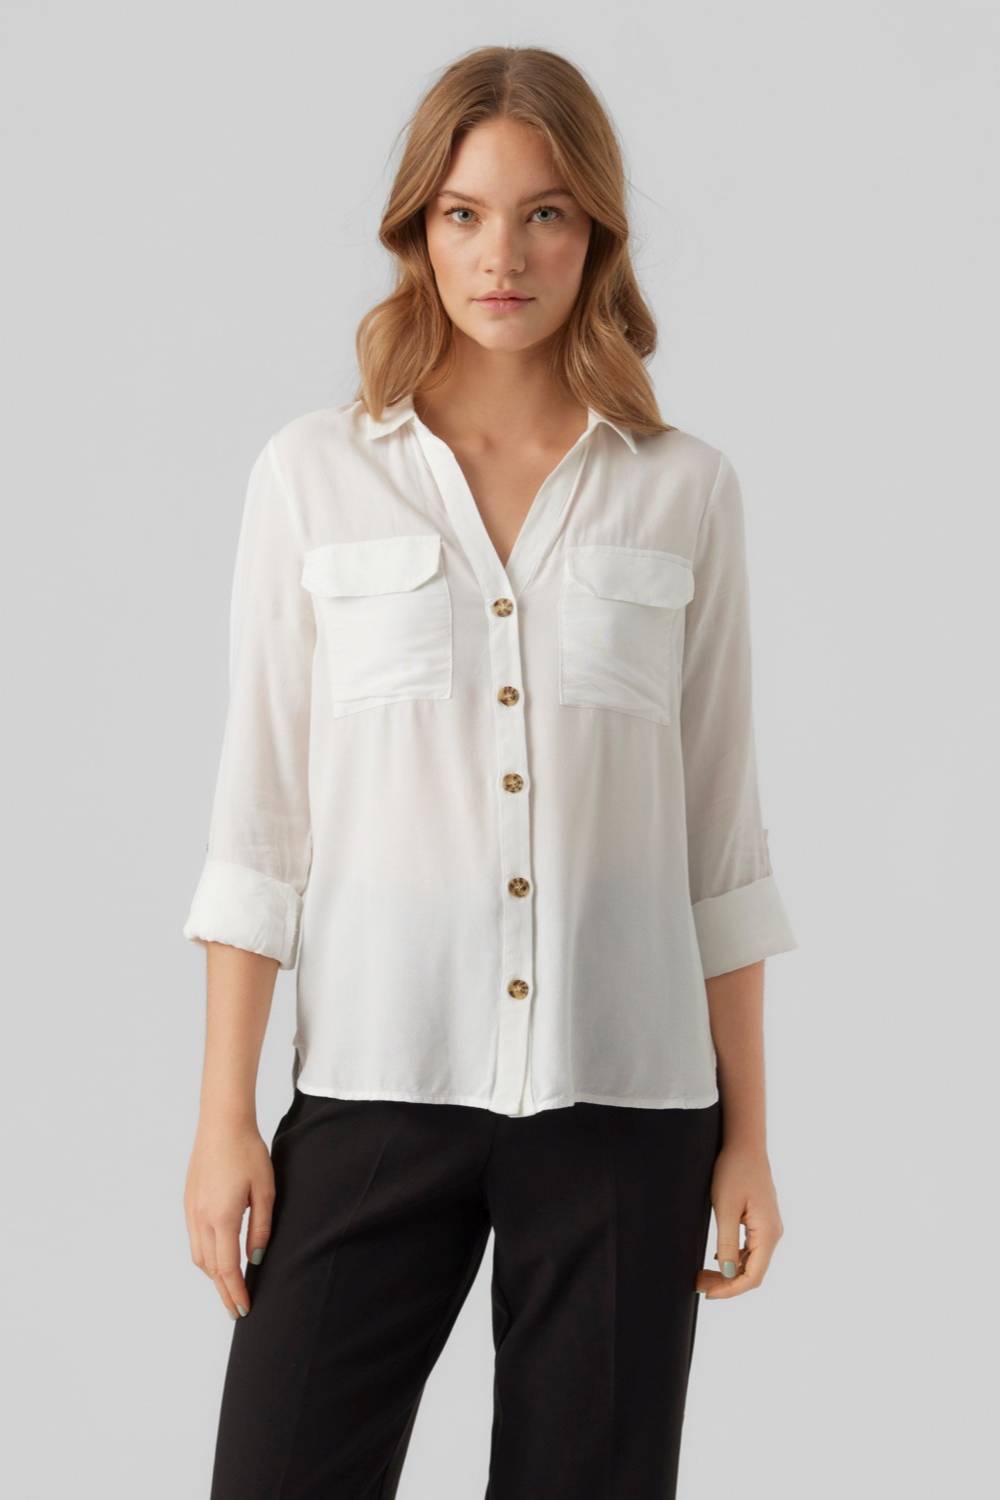 Vero Moda Bumpy Buttoned Blouse in White | iCLOTHING - iCLOTHING